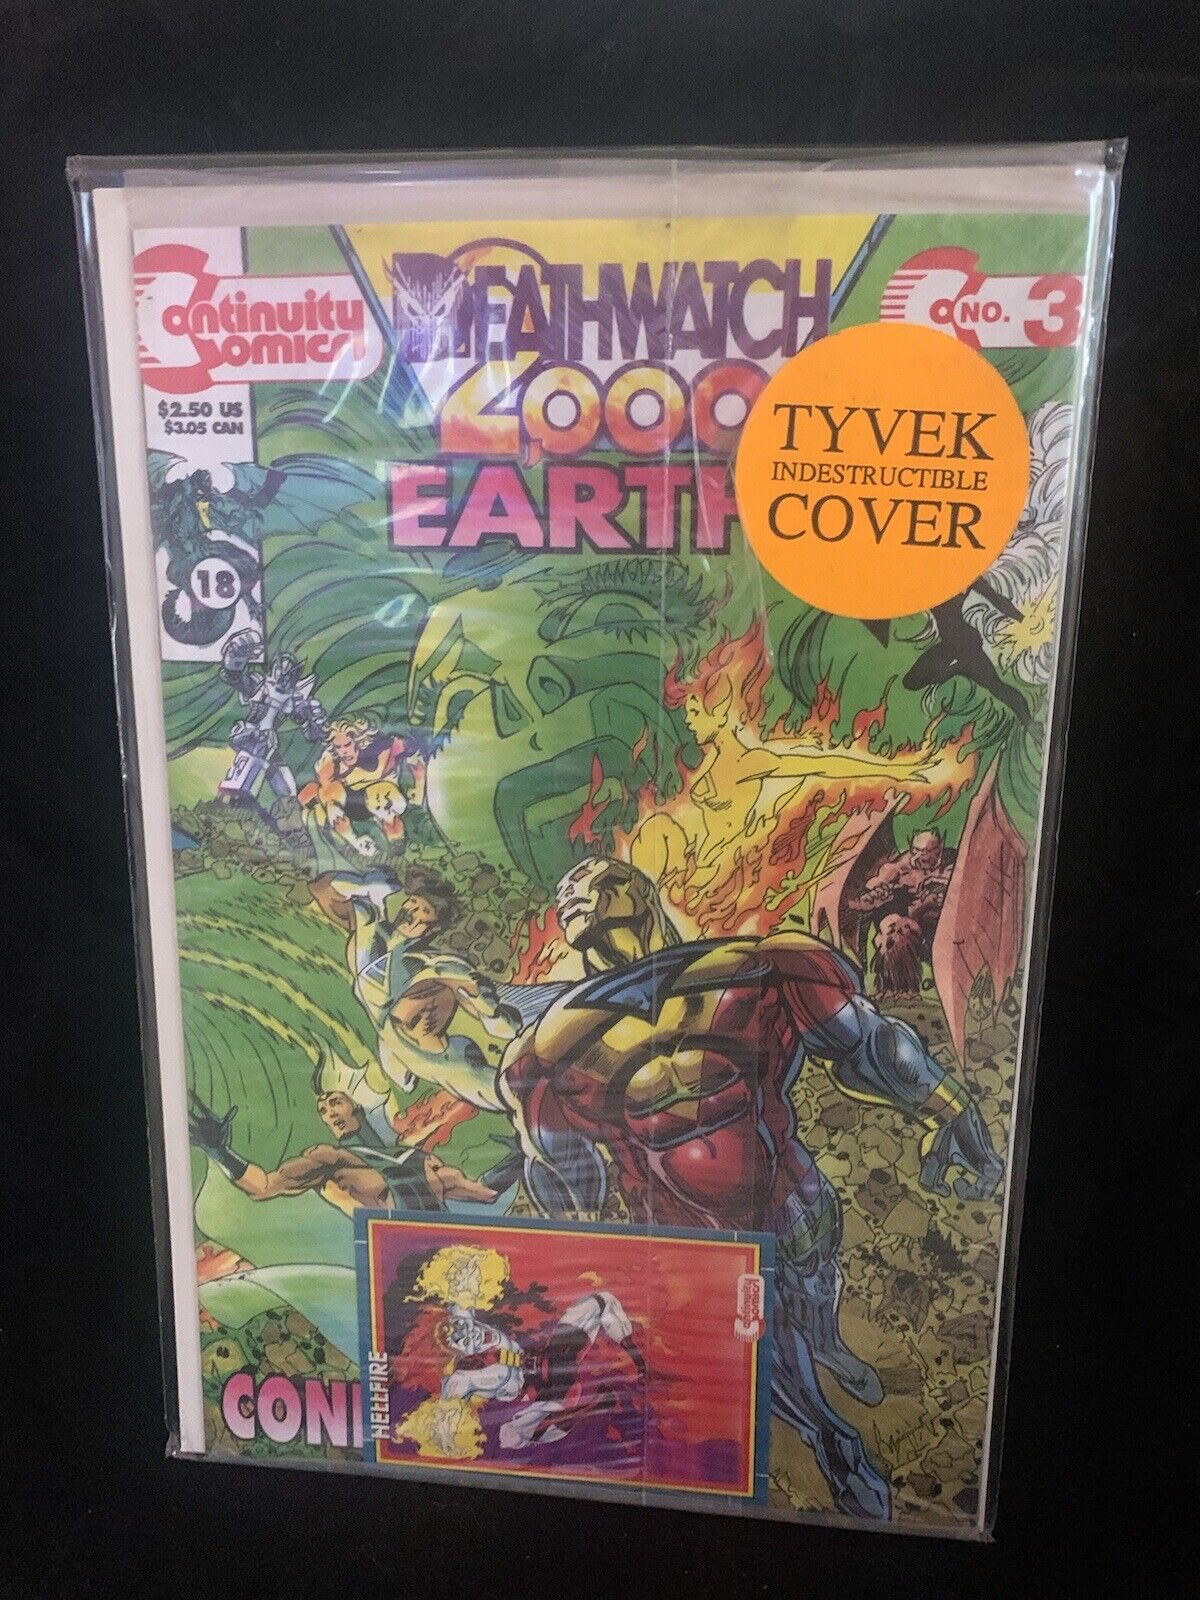 Earth 4 Deathwatch 2000 #3 CONTINUITY Comics 1993 Sealed